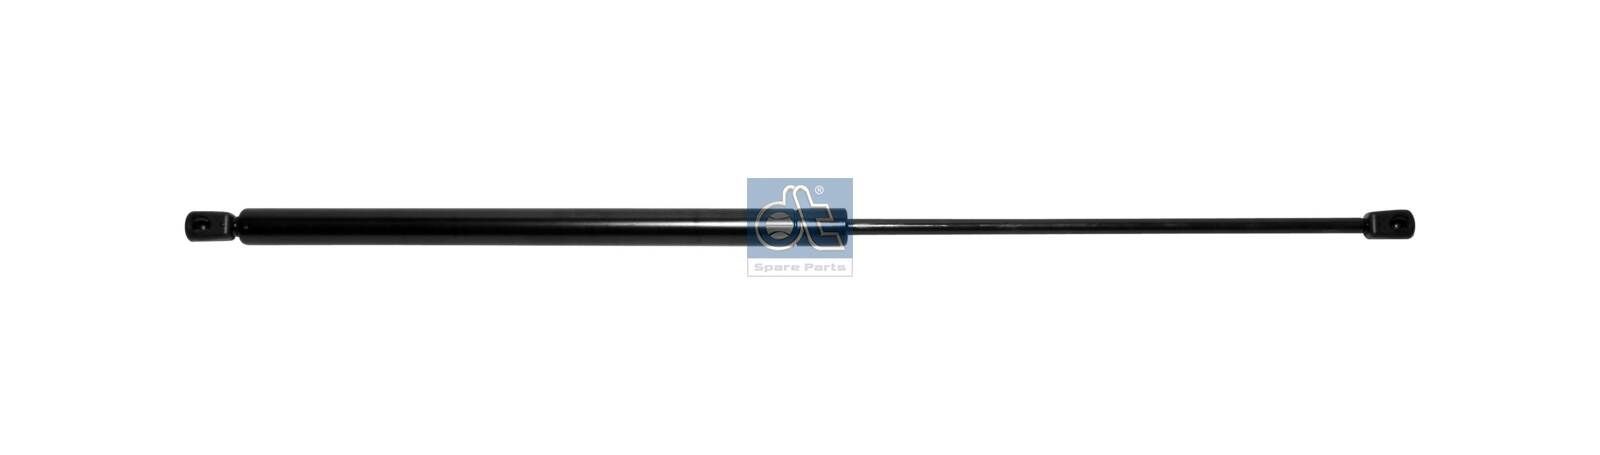 2564BY DT Spare Parts 500N, 685 mm Gas Spring 4.63438 buy